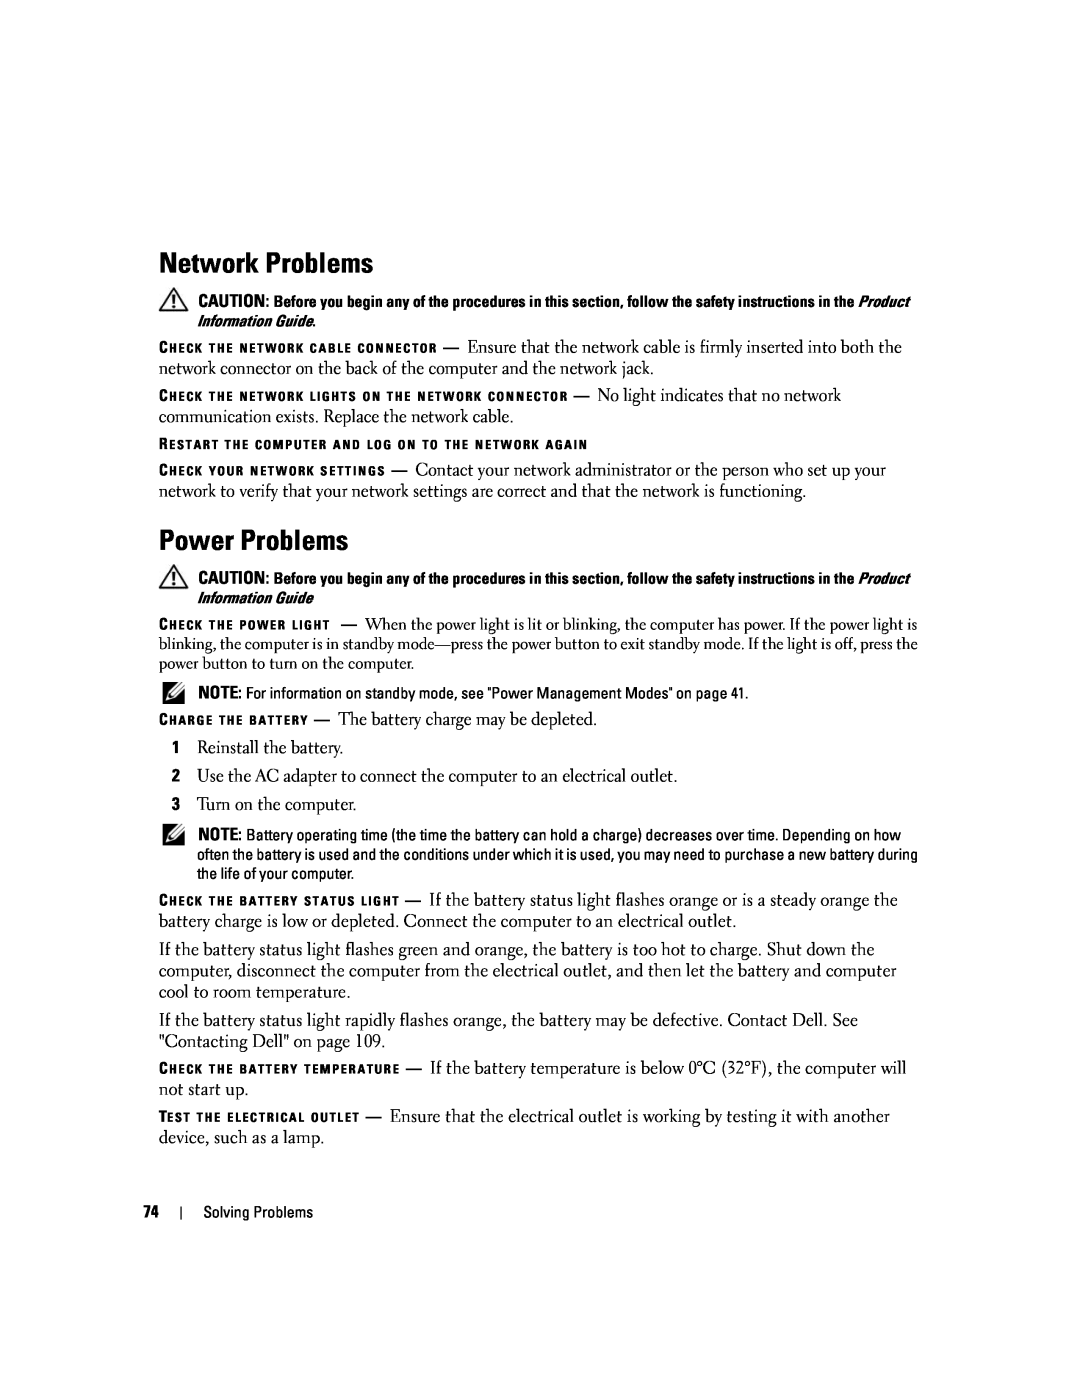 Dell 1501 owner manual Network Problems, Power Problems 